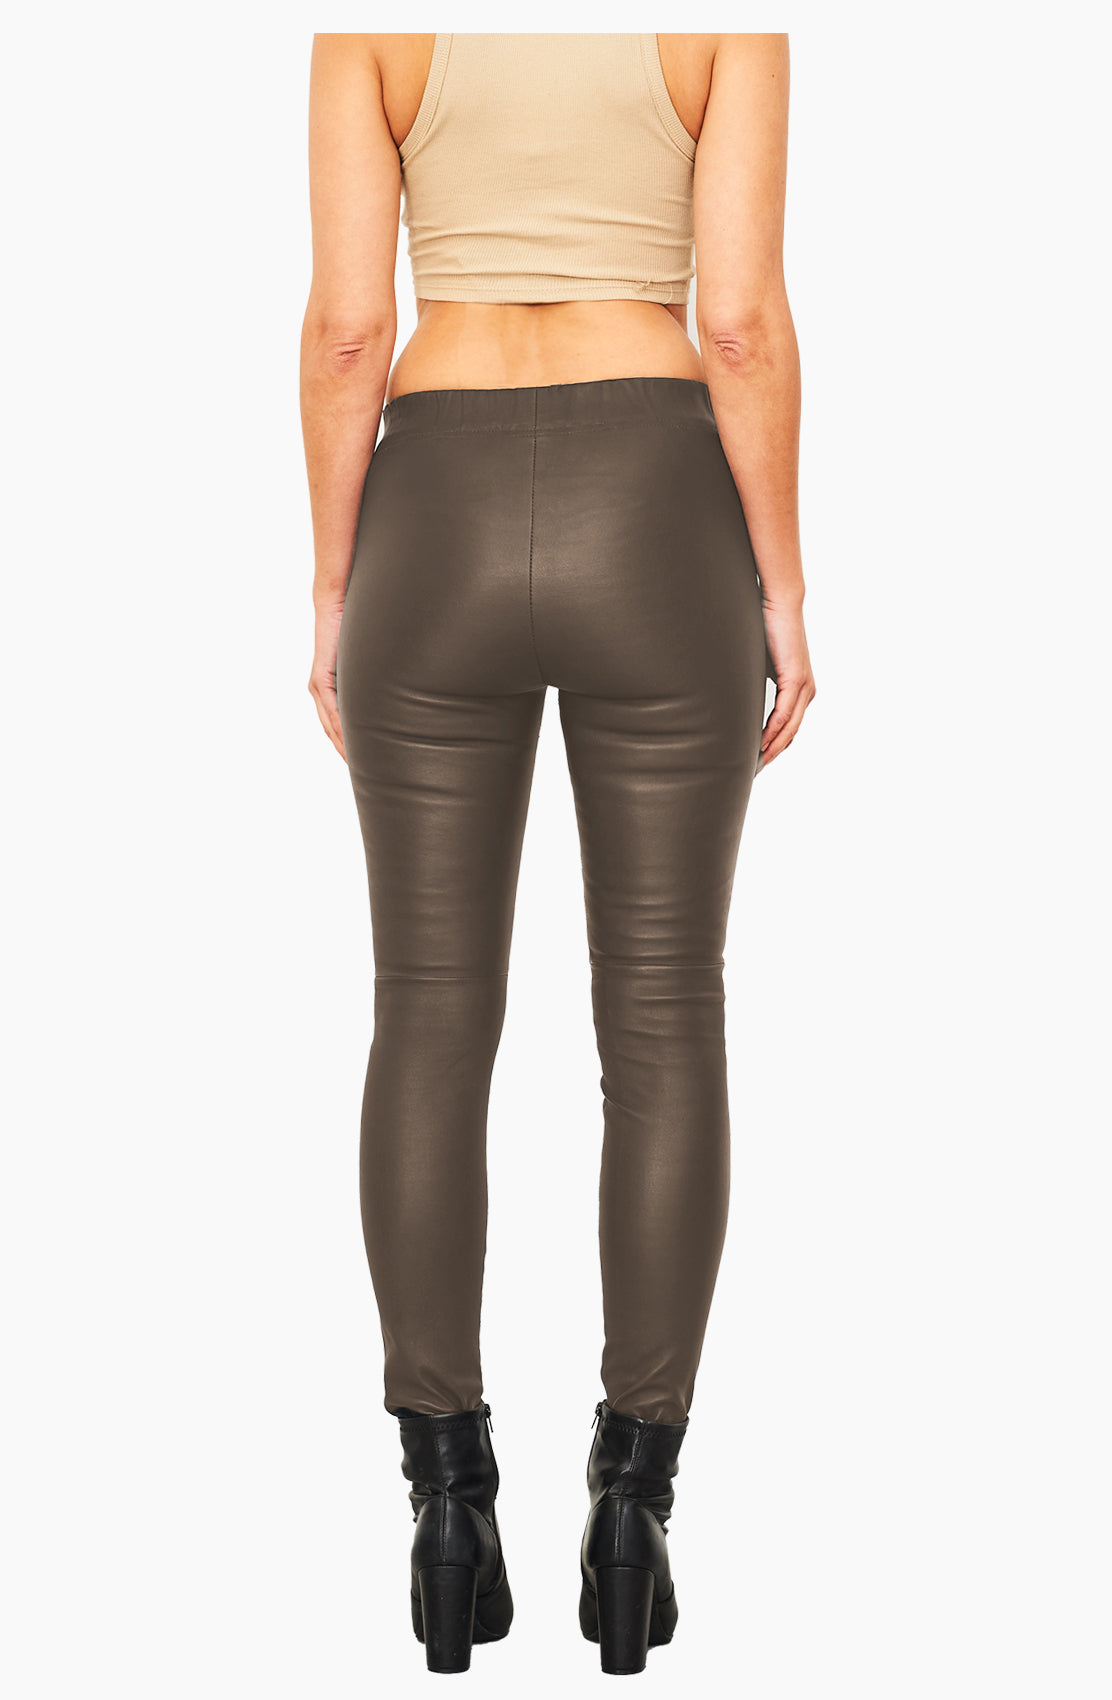 High-rise thermal leather leggings with wide waistband - dark brown |  SassyClassy.com